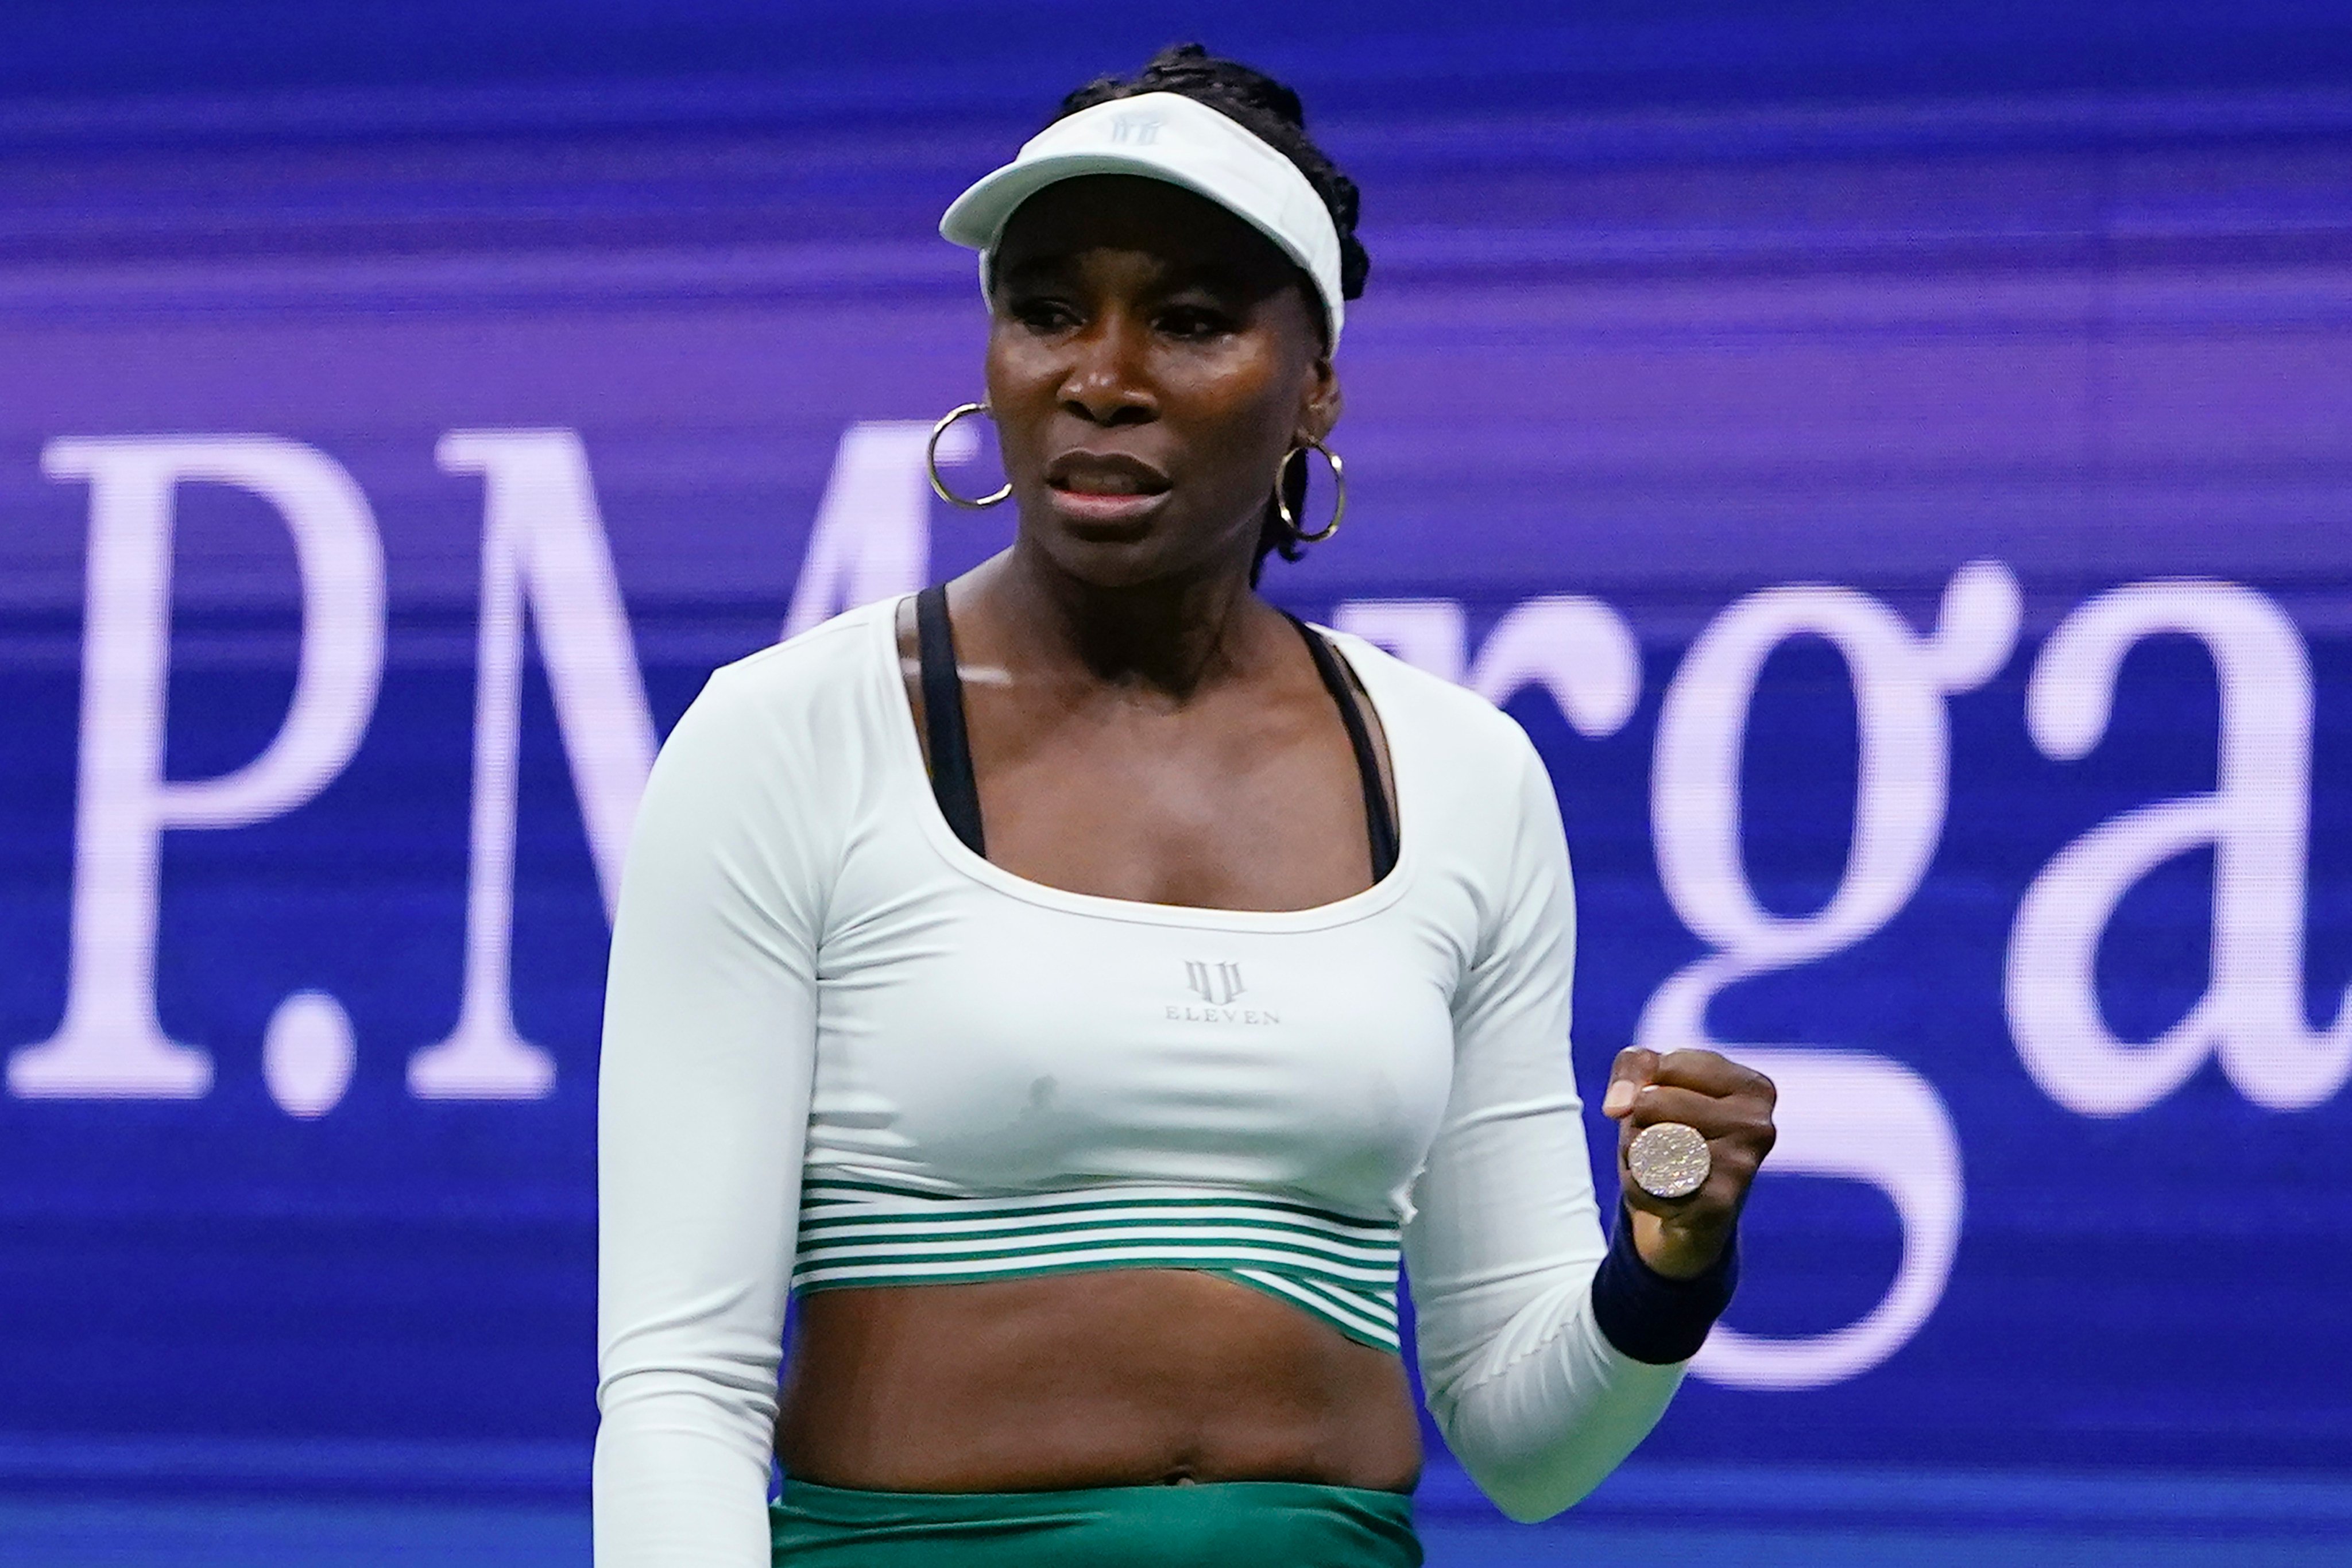 Venus Williams received a wild card entry to this year’s Australian Open. Photo: AP